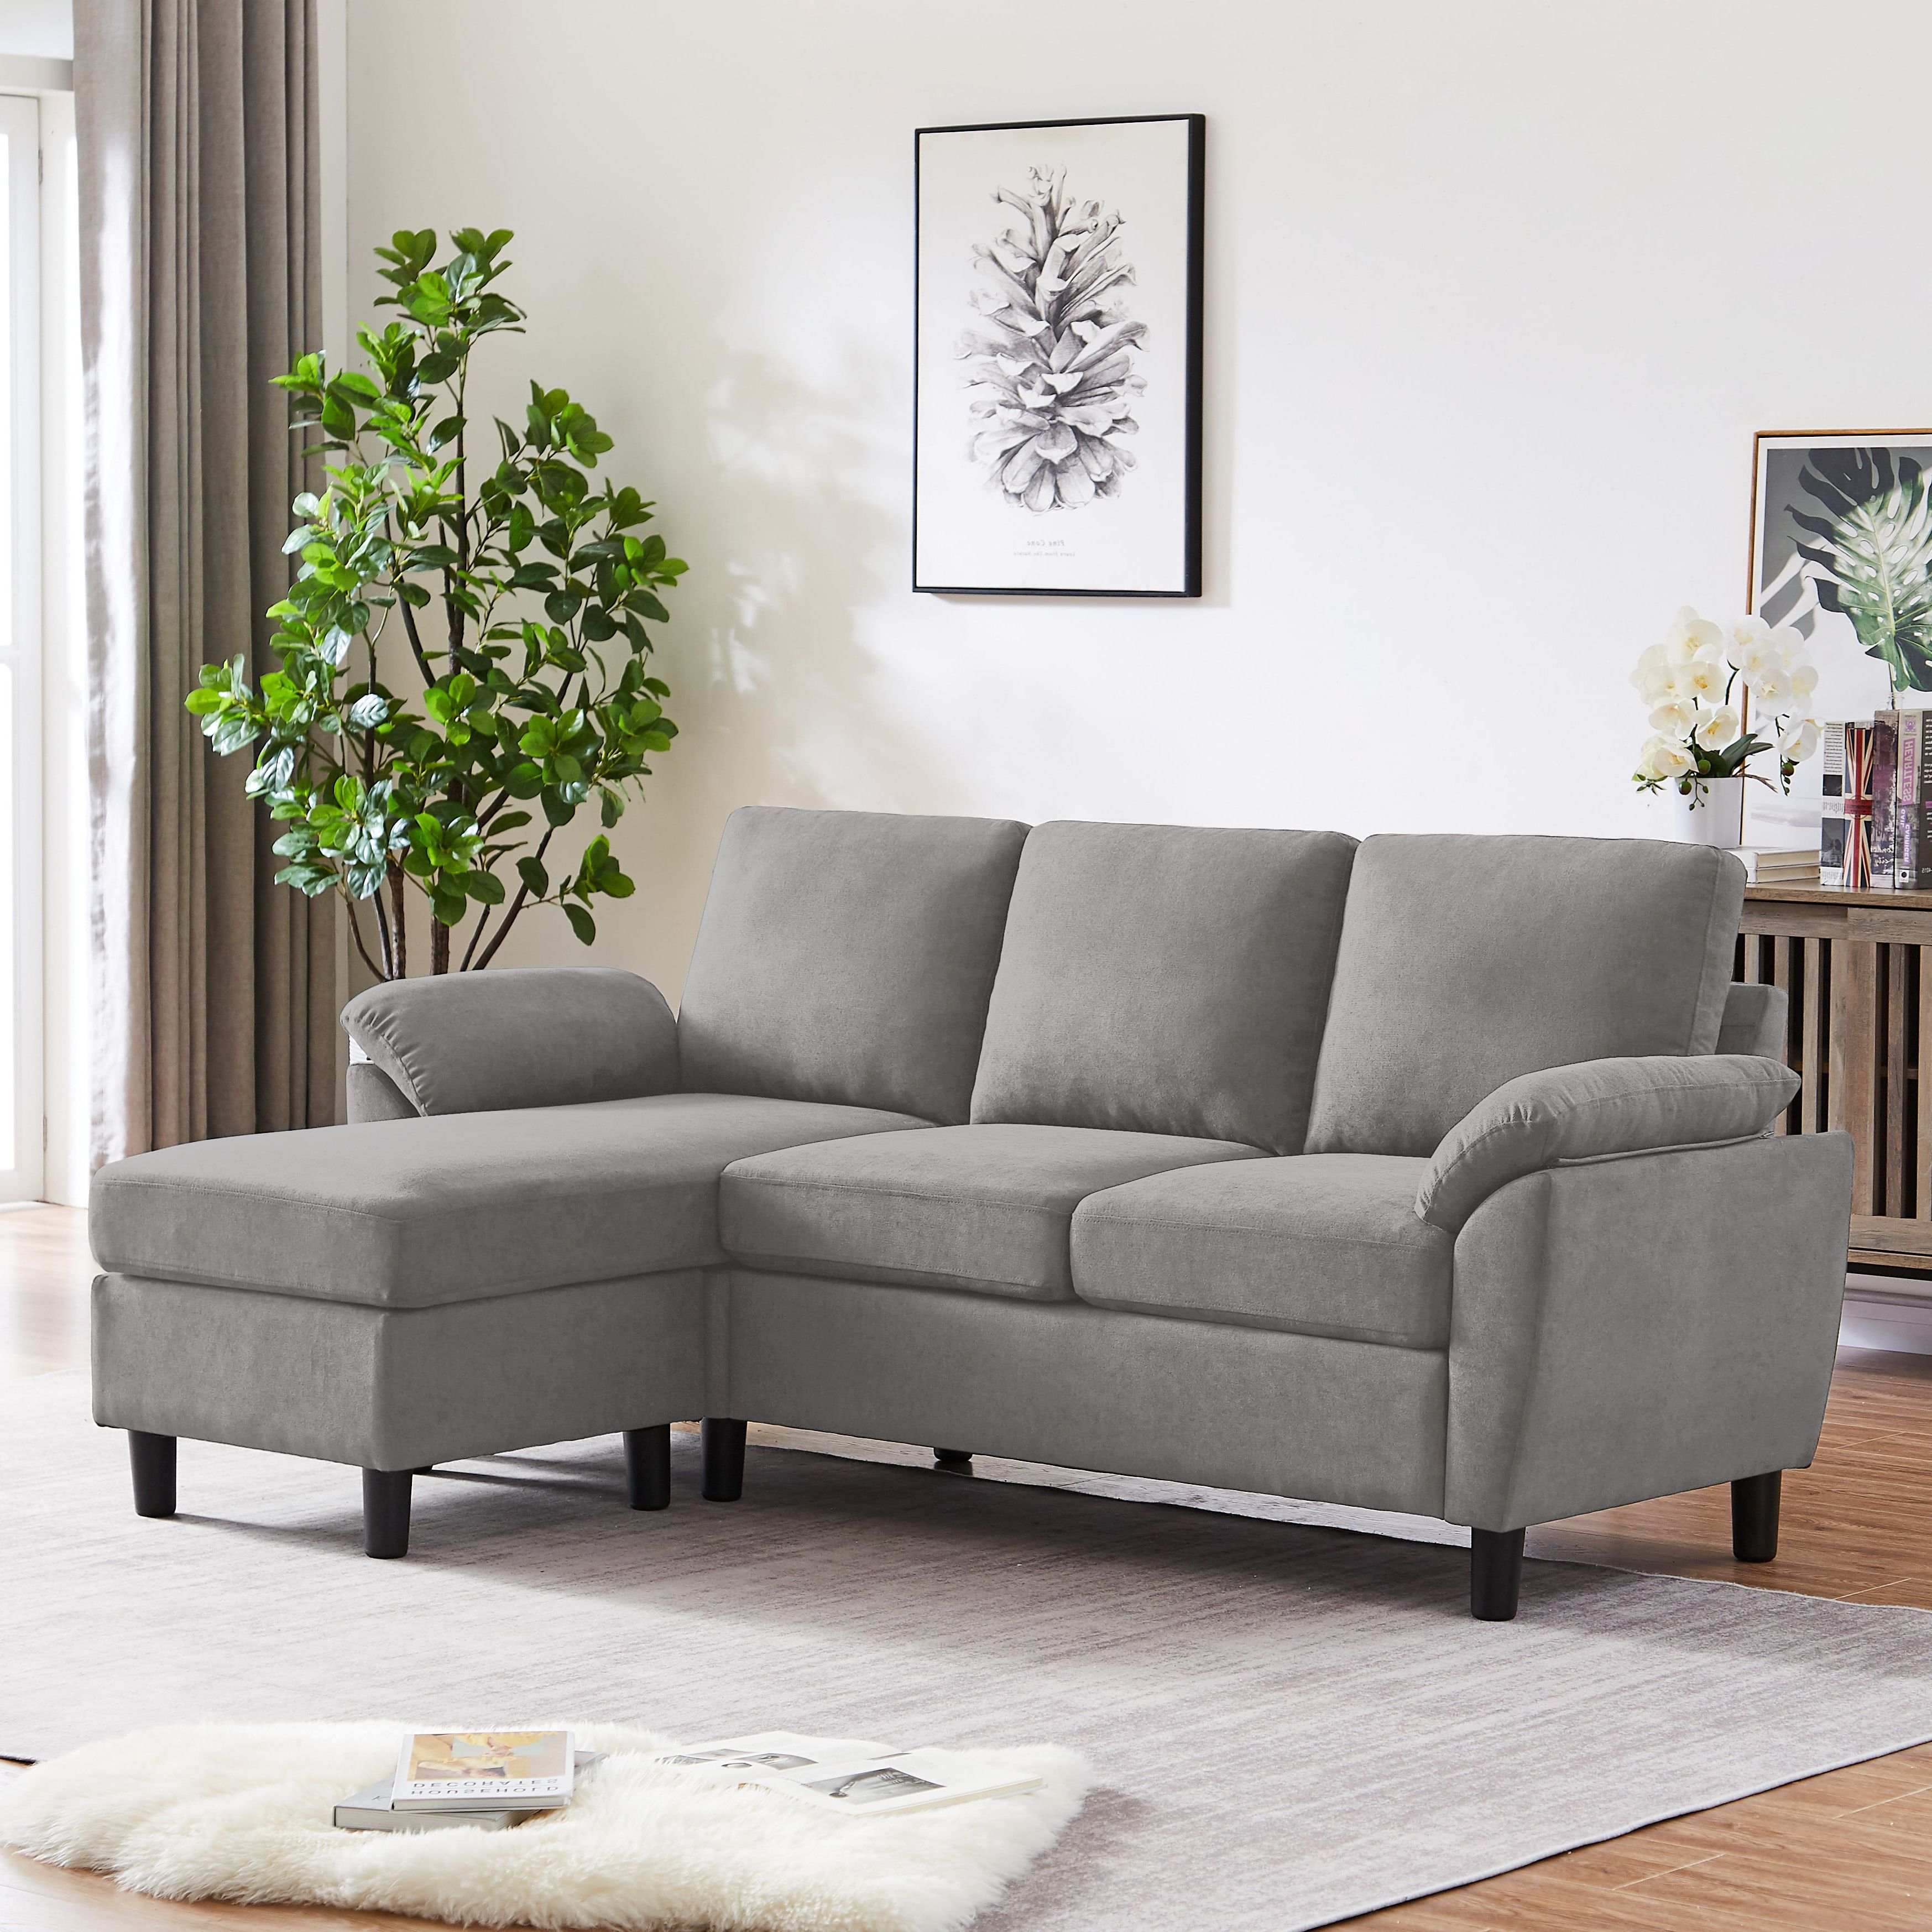 Jarenie Modern Fabric L Shapped Sofa Sectional Couches For Living Room  Convertible Sofa With Matching Chaise For Office, Apartment, Studio –  Walmart With Regard To Modern Fabric L Shapped Sofas (Gallery 14 of 20)